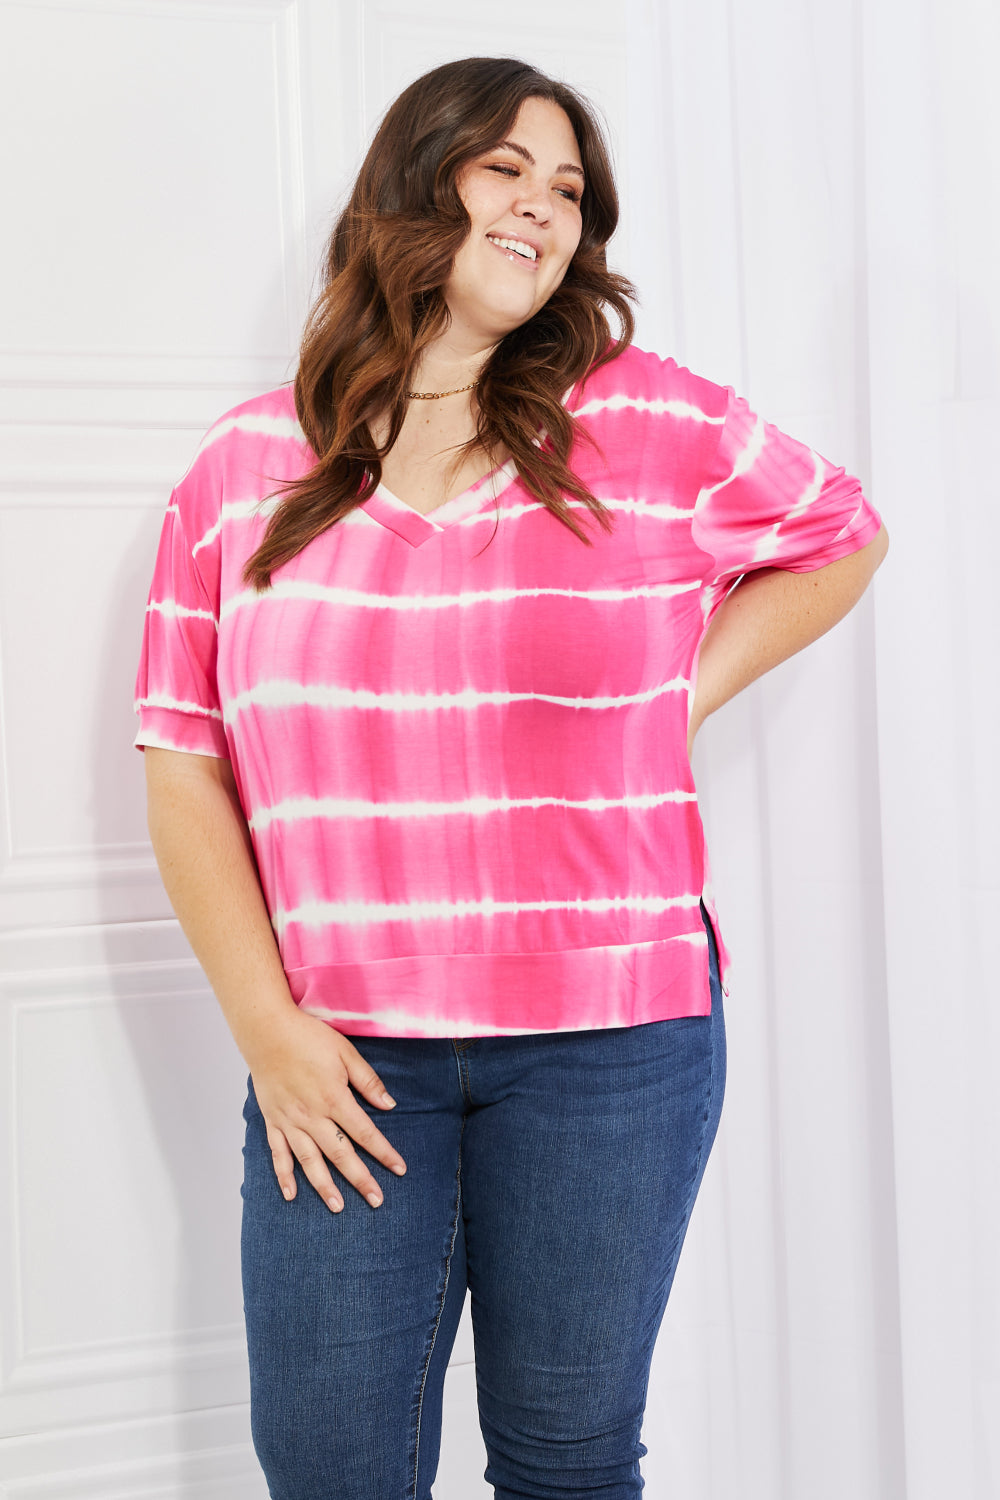 Womens / Teen Girls / Womens Plus Size - Yelete Full Size Oversized Fit V-Neck Striped Top